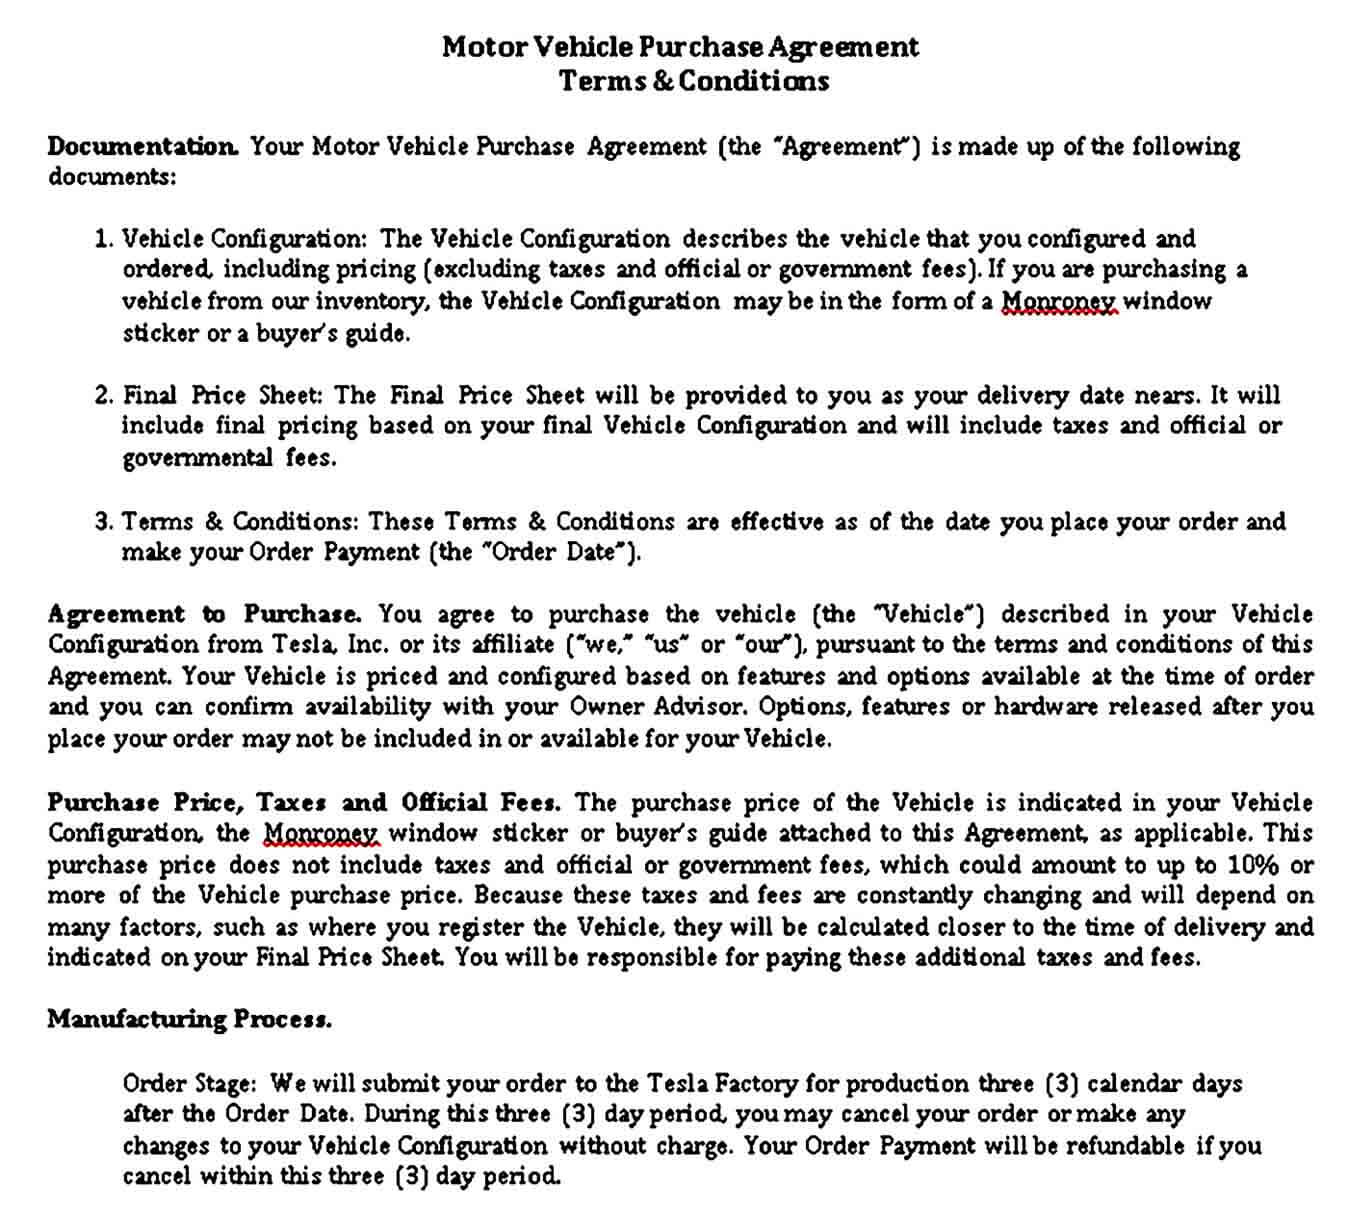 Motor Vehicle Purchase Agreement